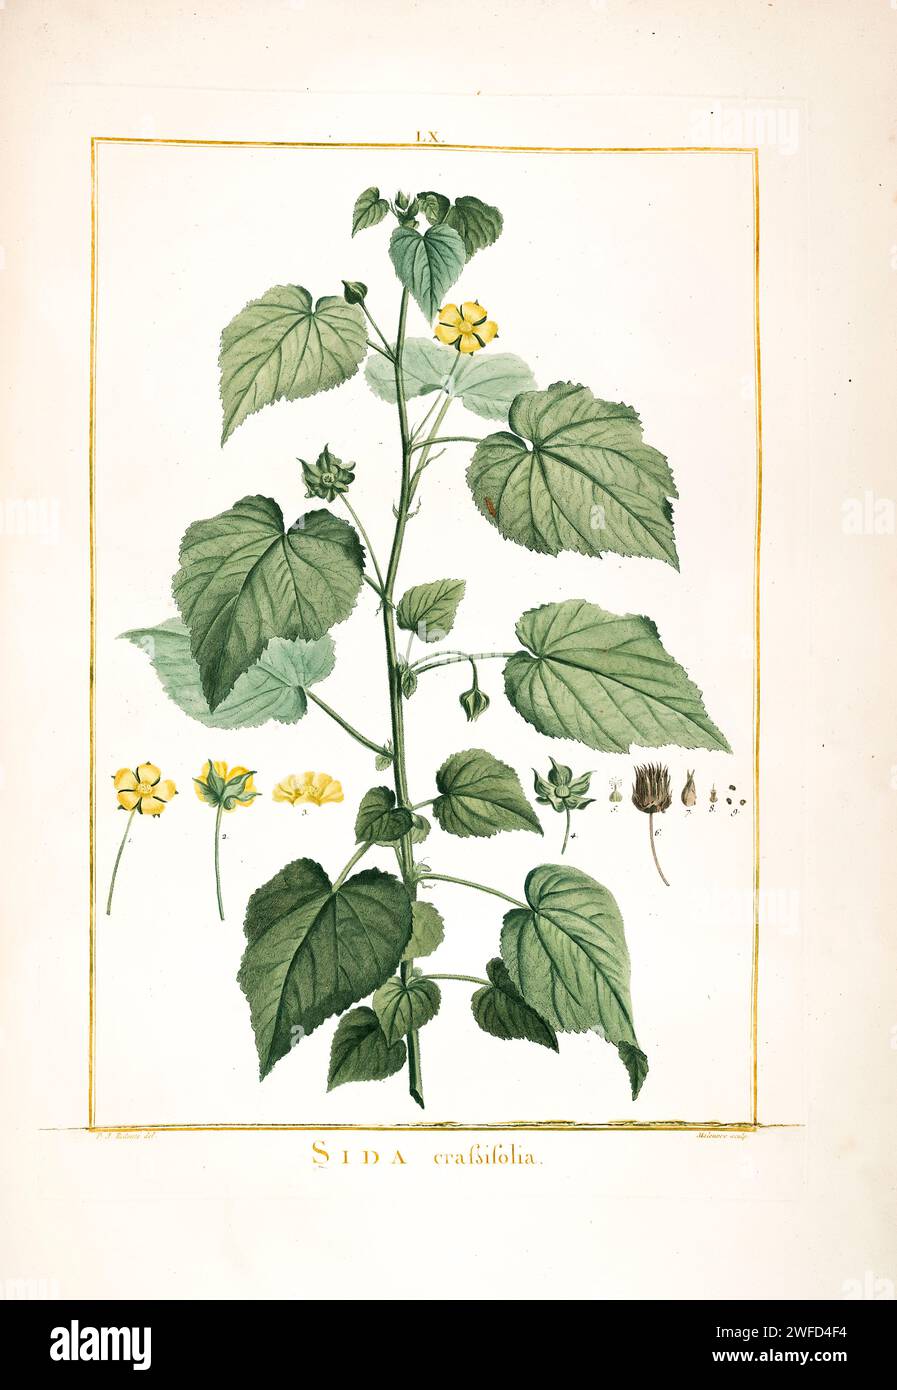 Sida crassifolia syn Abutilon abutiloides Hand Painted by Pierre-Joseph Redouté and published in Stirpes Novae aut Minus Cognitae (1784) by Charles Louis L'Héritier de Brutelle. Abutilon is a large genus of flowering plants in the mallow family, Malvaceae. It is distributed throughout the tropics and subtropics of the Americas, Africa, Asia, and Australia. General common names include Indian mallow and velvetleaf; ornamental varieties may be known as room maple, parlor maple, or flowering maple Stock Photo